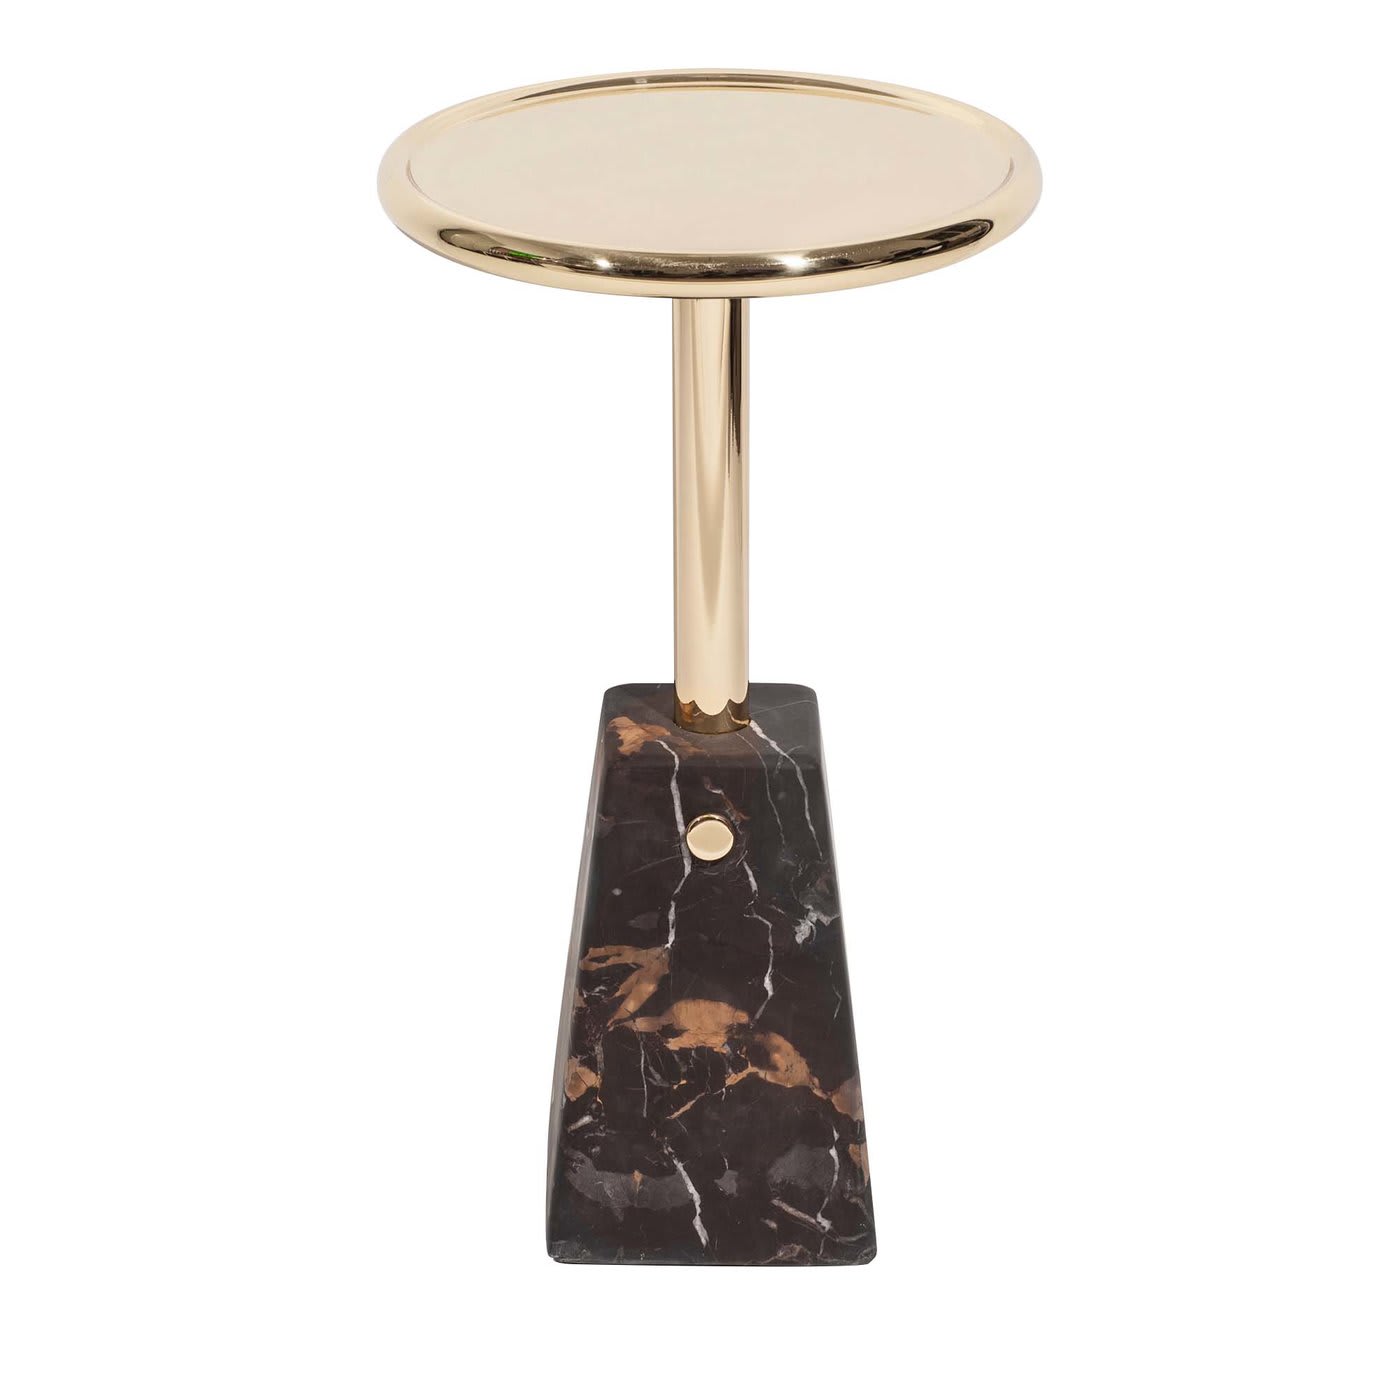 Peso Black and Gold Side Table - StoneLab Design